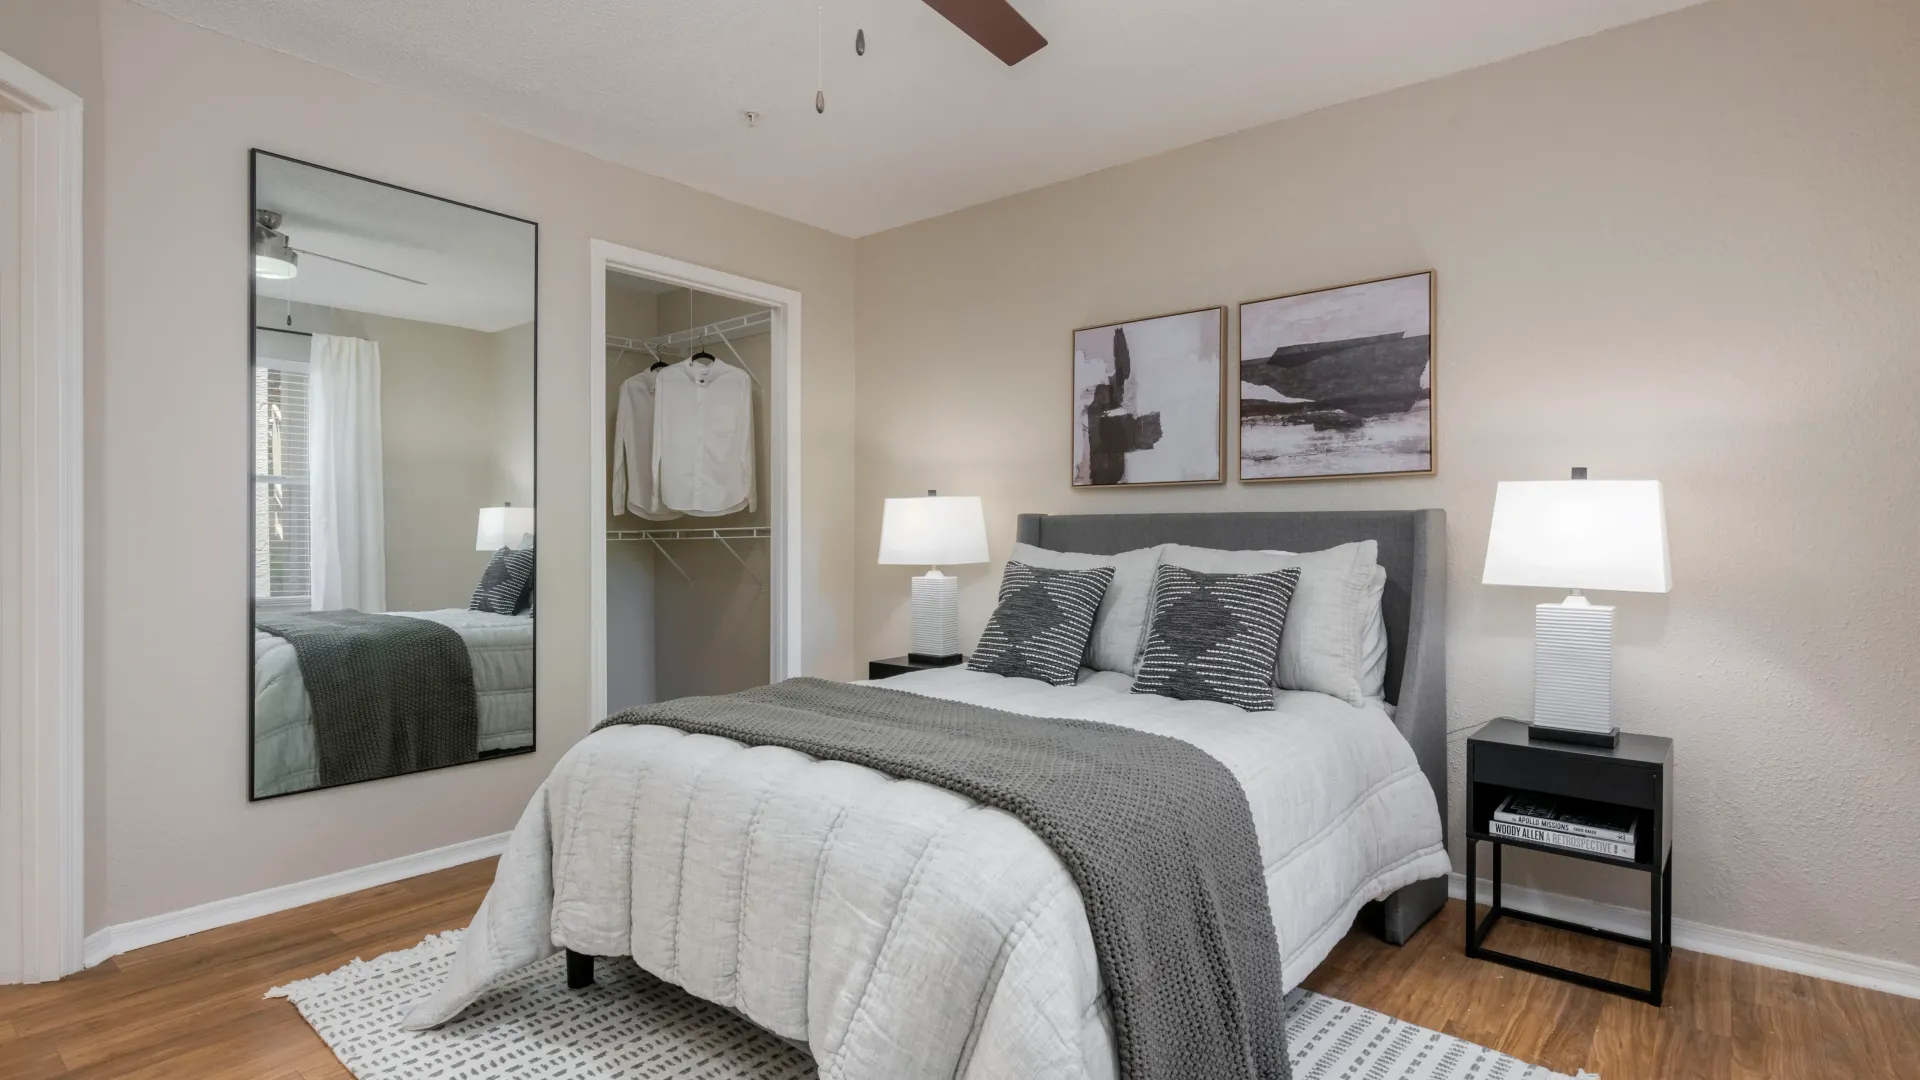 An upgraded bedroom with warm wood-style flooring, a contemporary ceiling fan, and a generously sized closet with built in shelving.